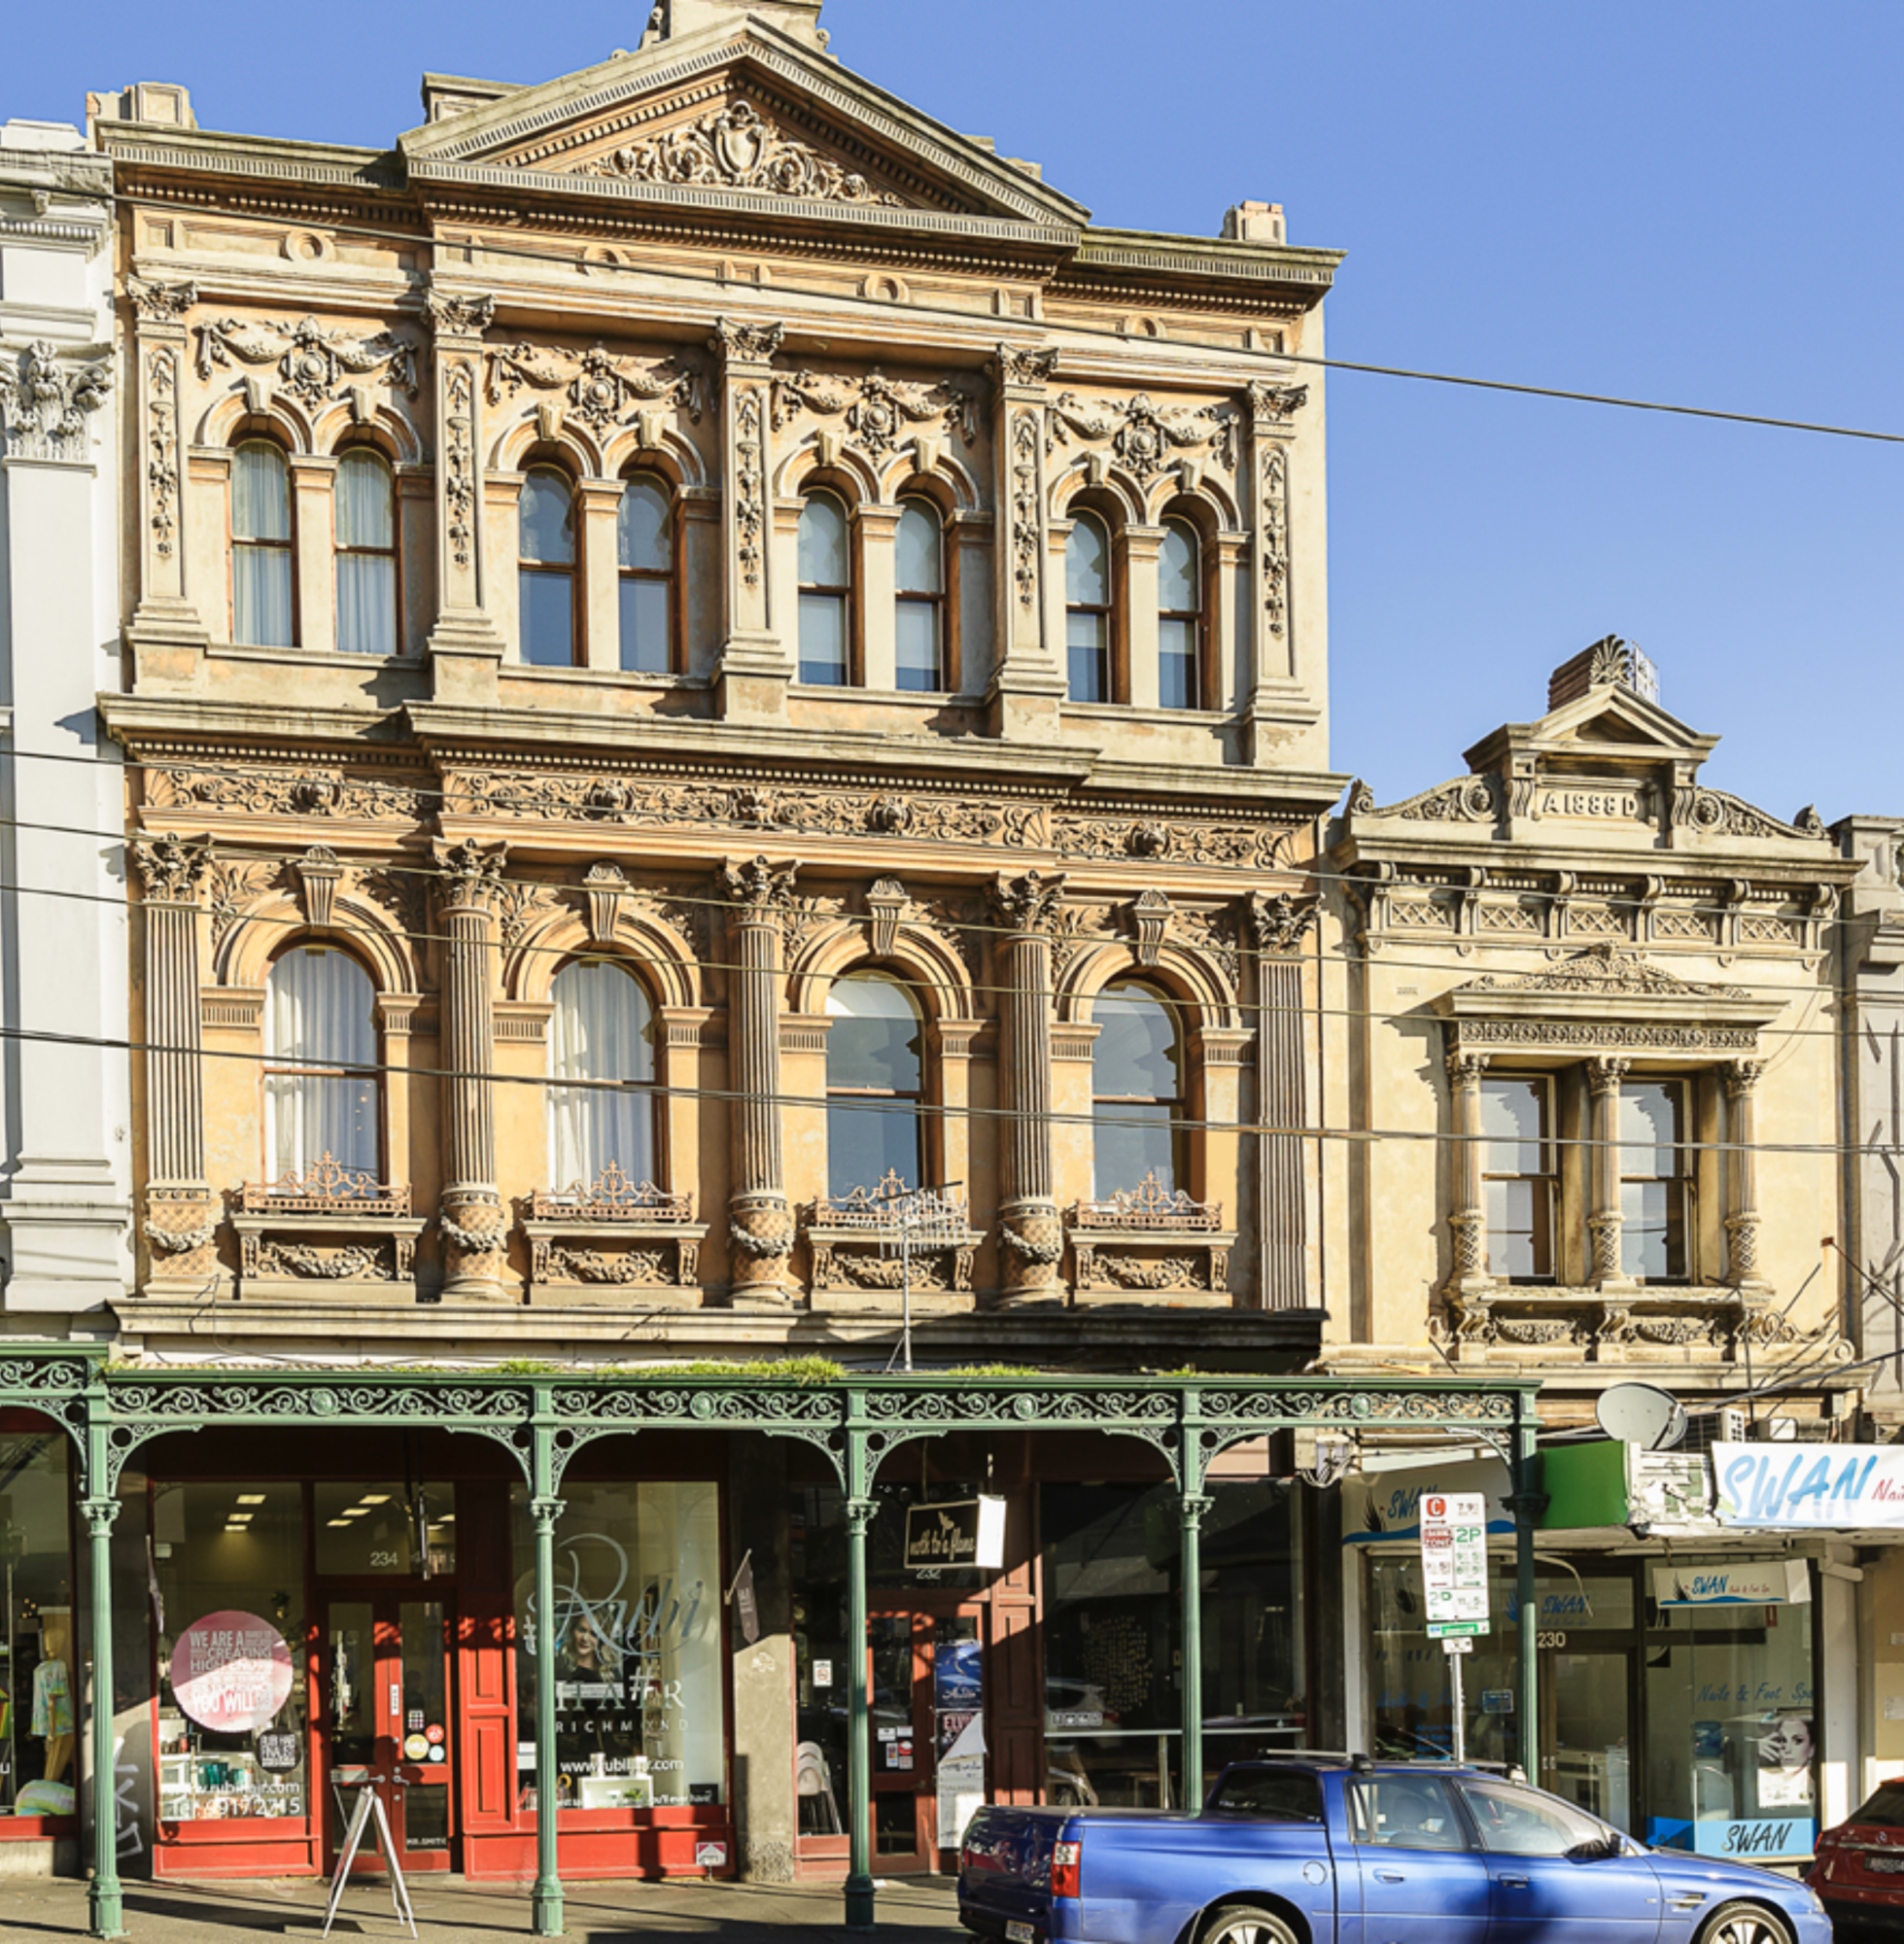 The City Of Richmond Coffee Palace, view in Swan Street today